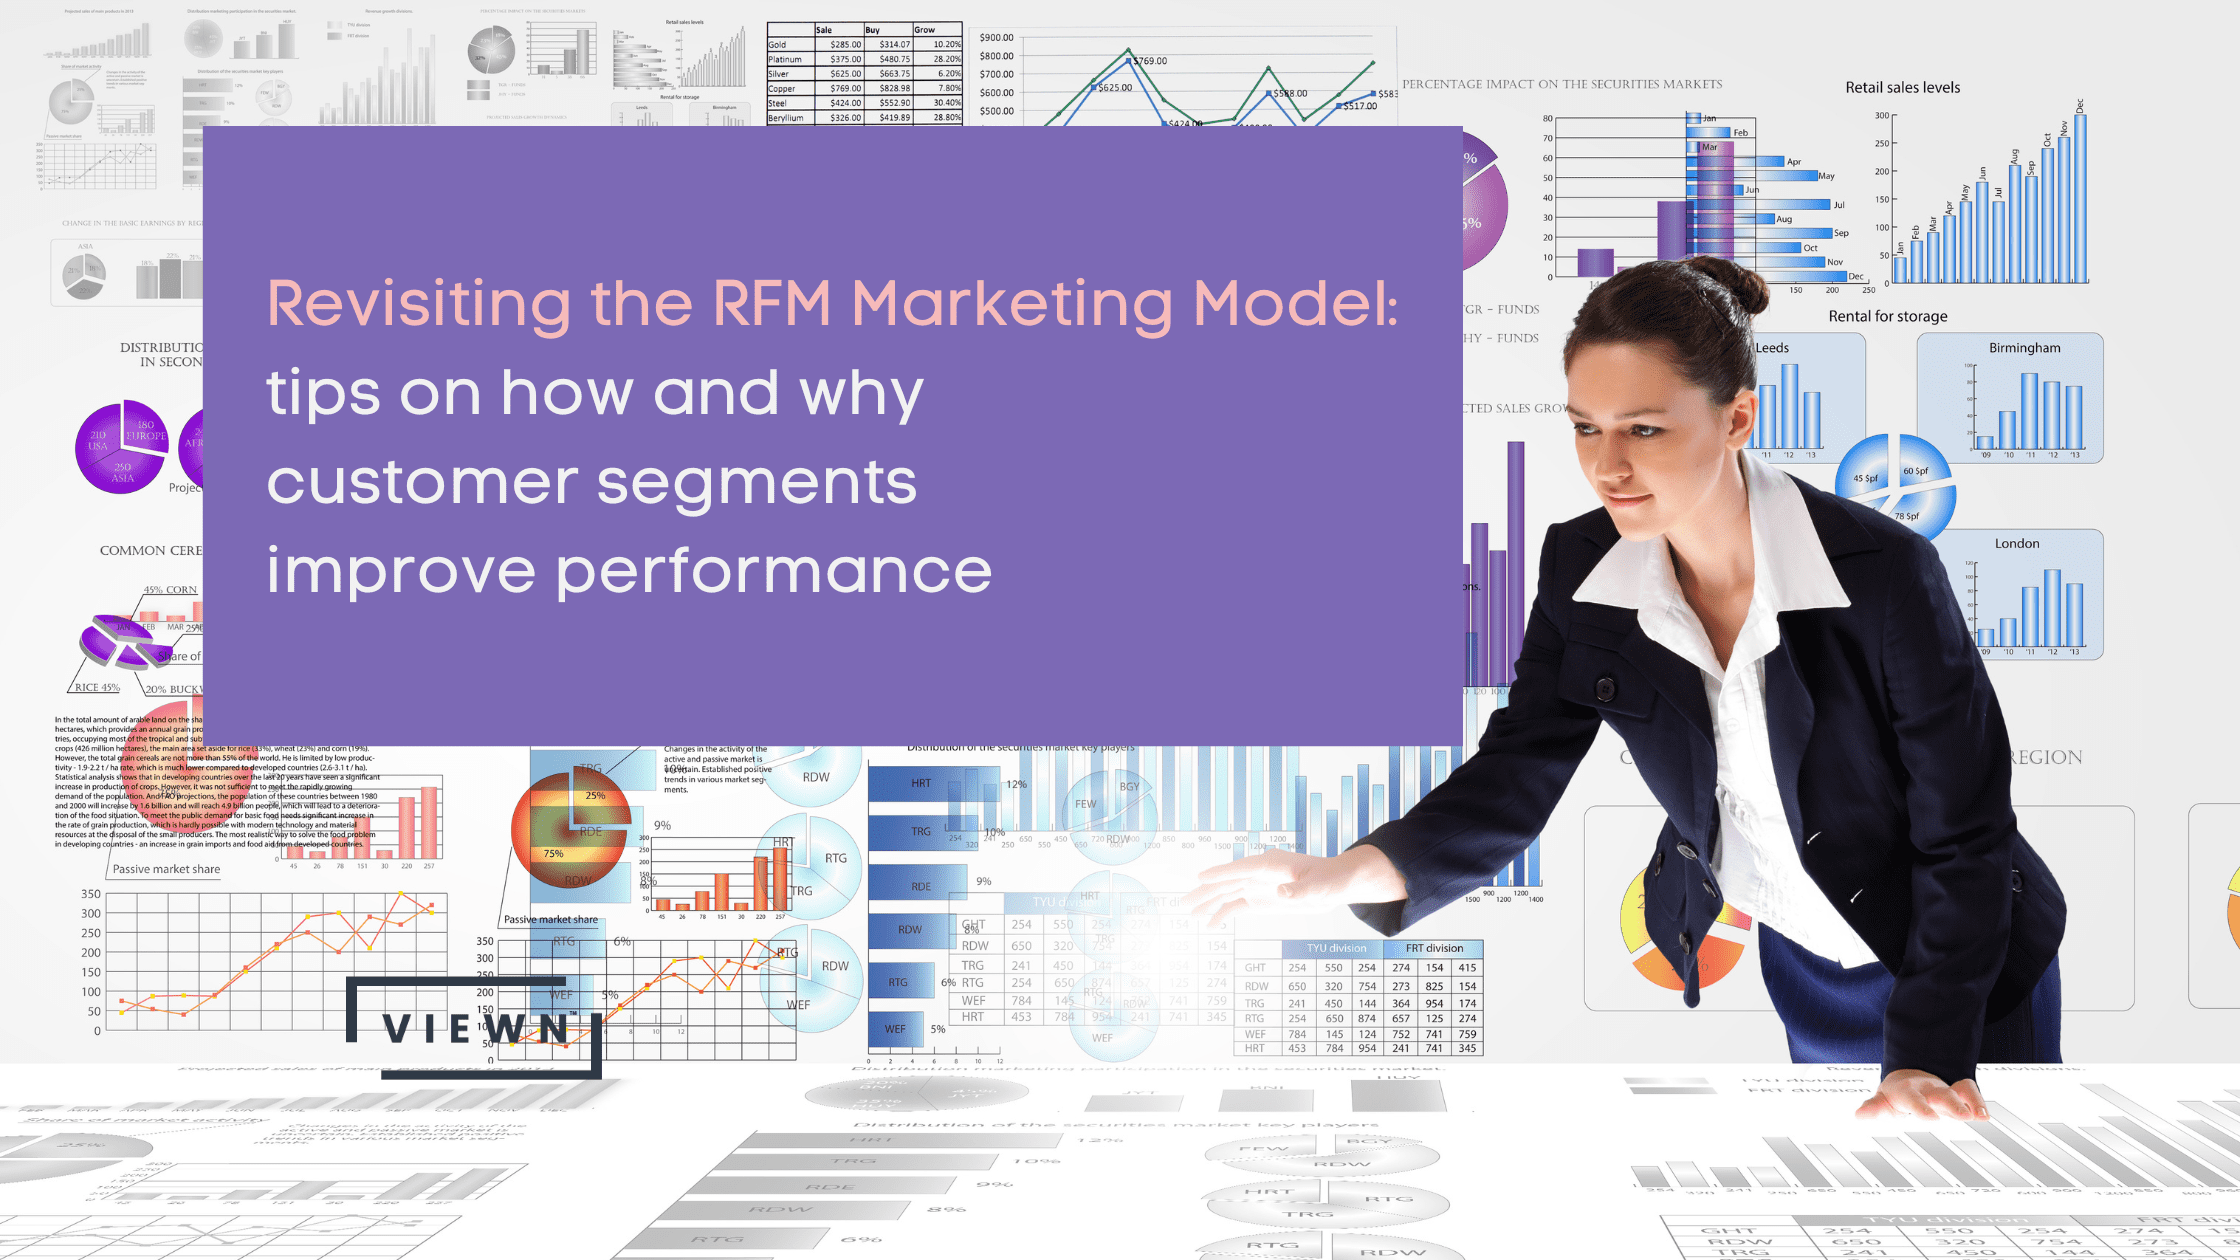 Revisiting the RFM Marketing Model- tips on how and why customer segments improve performance